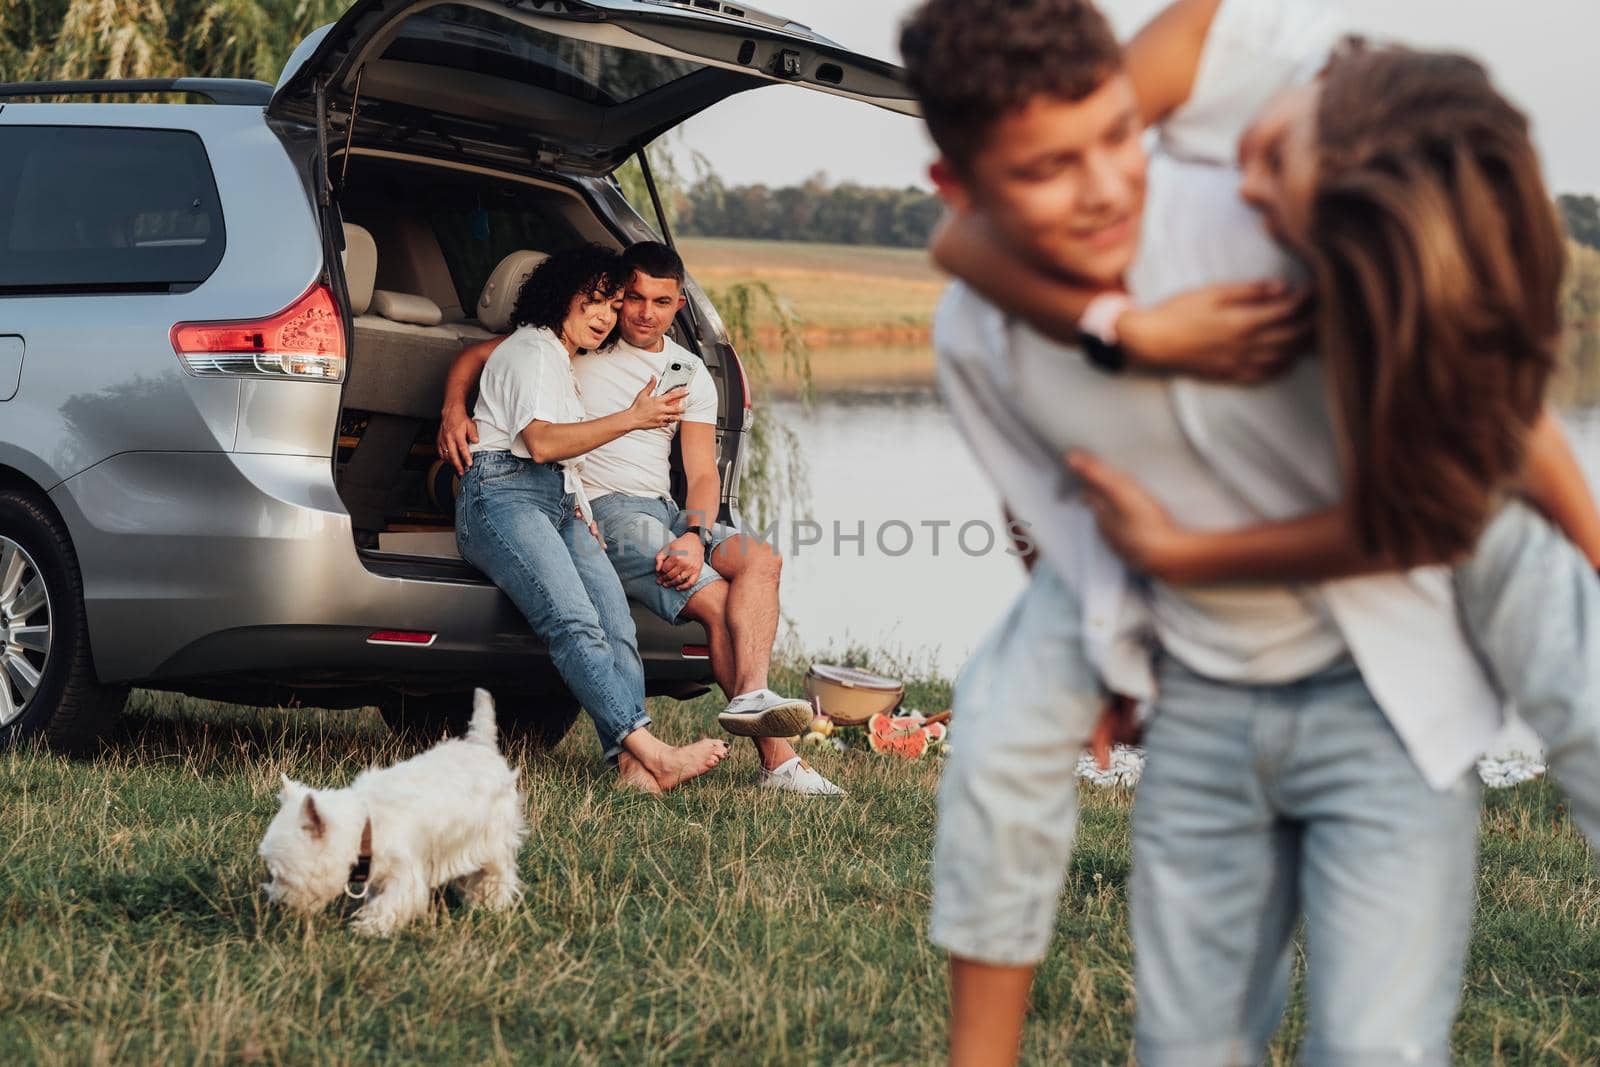 Happy Mother and Father Sitting in Trunk of Minivan Car While Children Playing with by Lake, Four Members Family and Pet Dog Having Weekend Picnic Outdoors